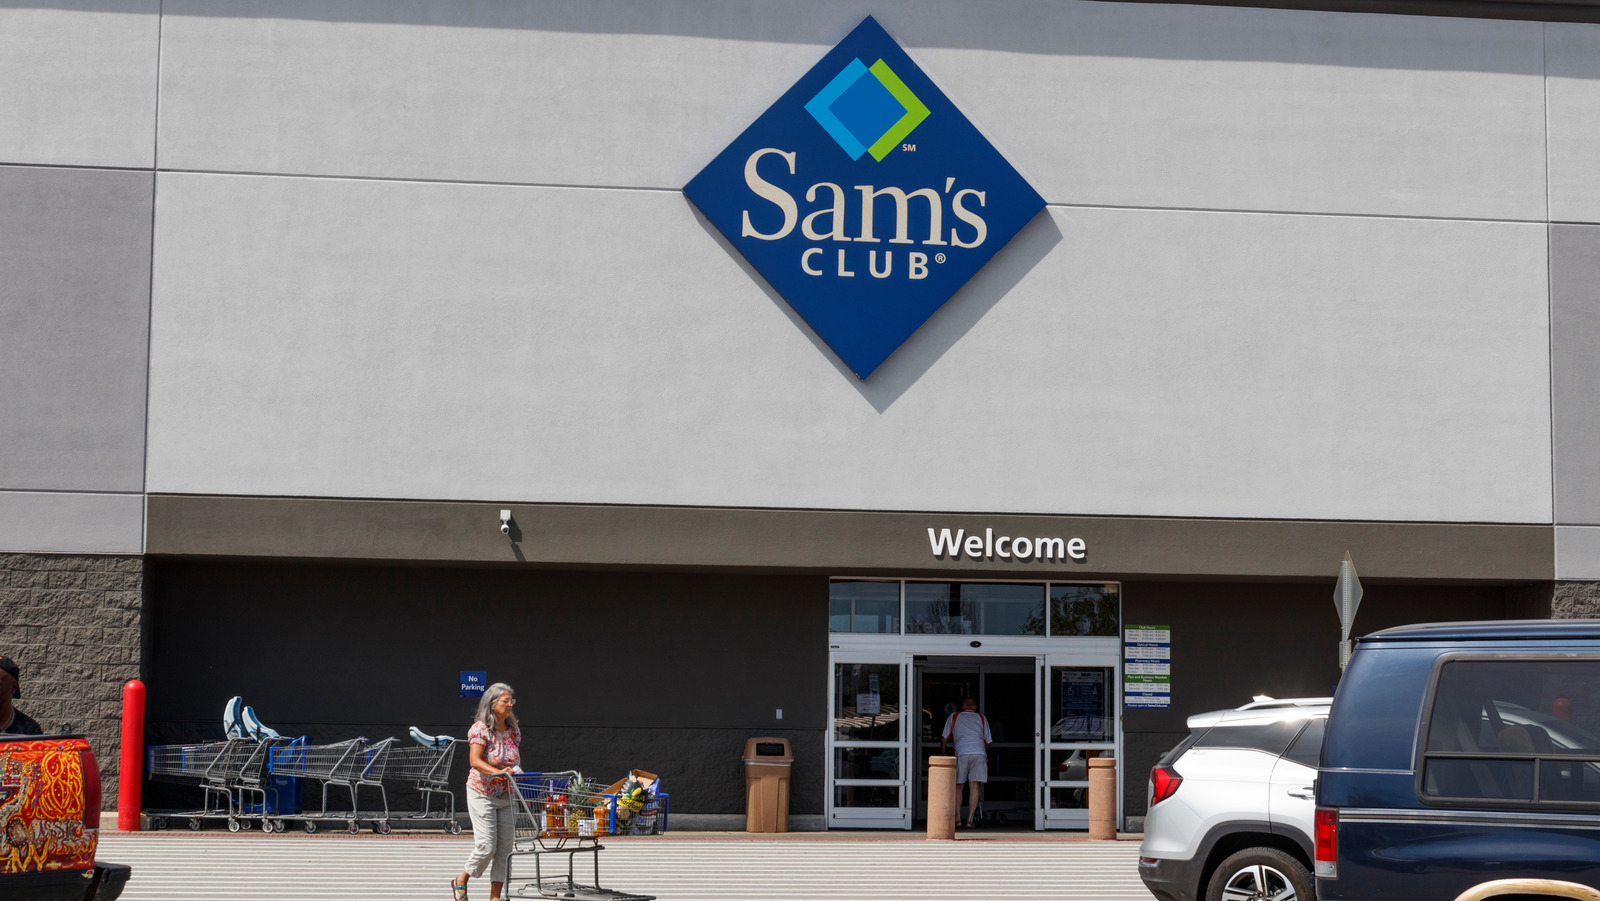 Here's How To Get A OneYear Sam's Club Membership For Just 14.99